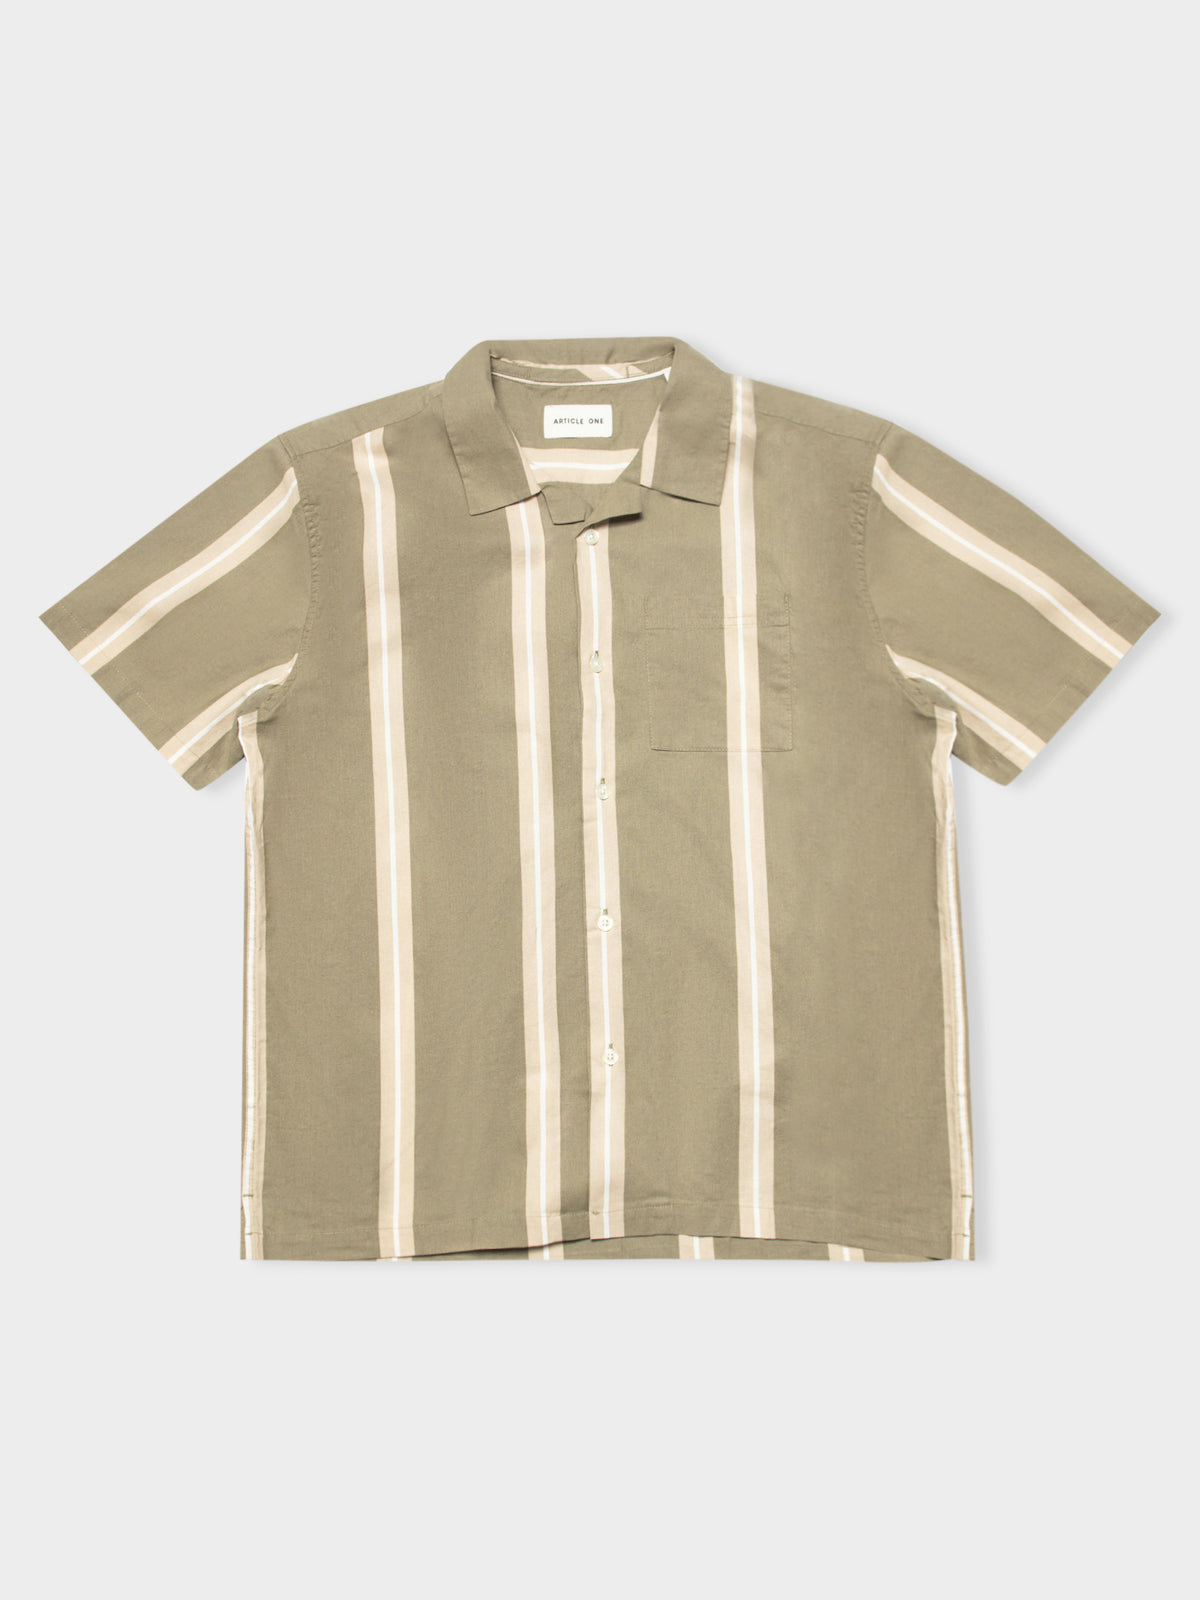 Linear Shirt in Thistle